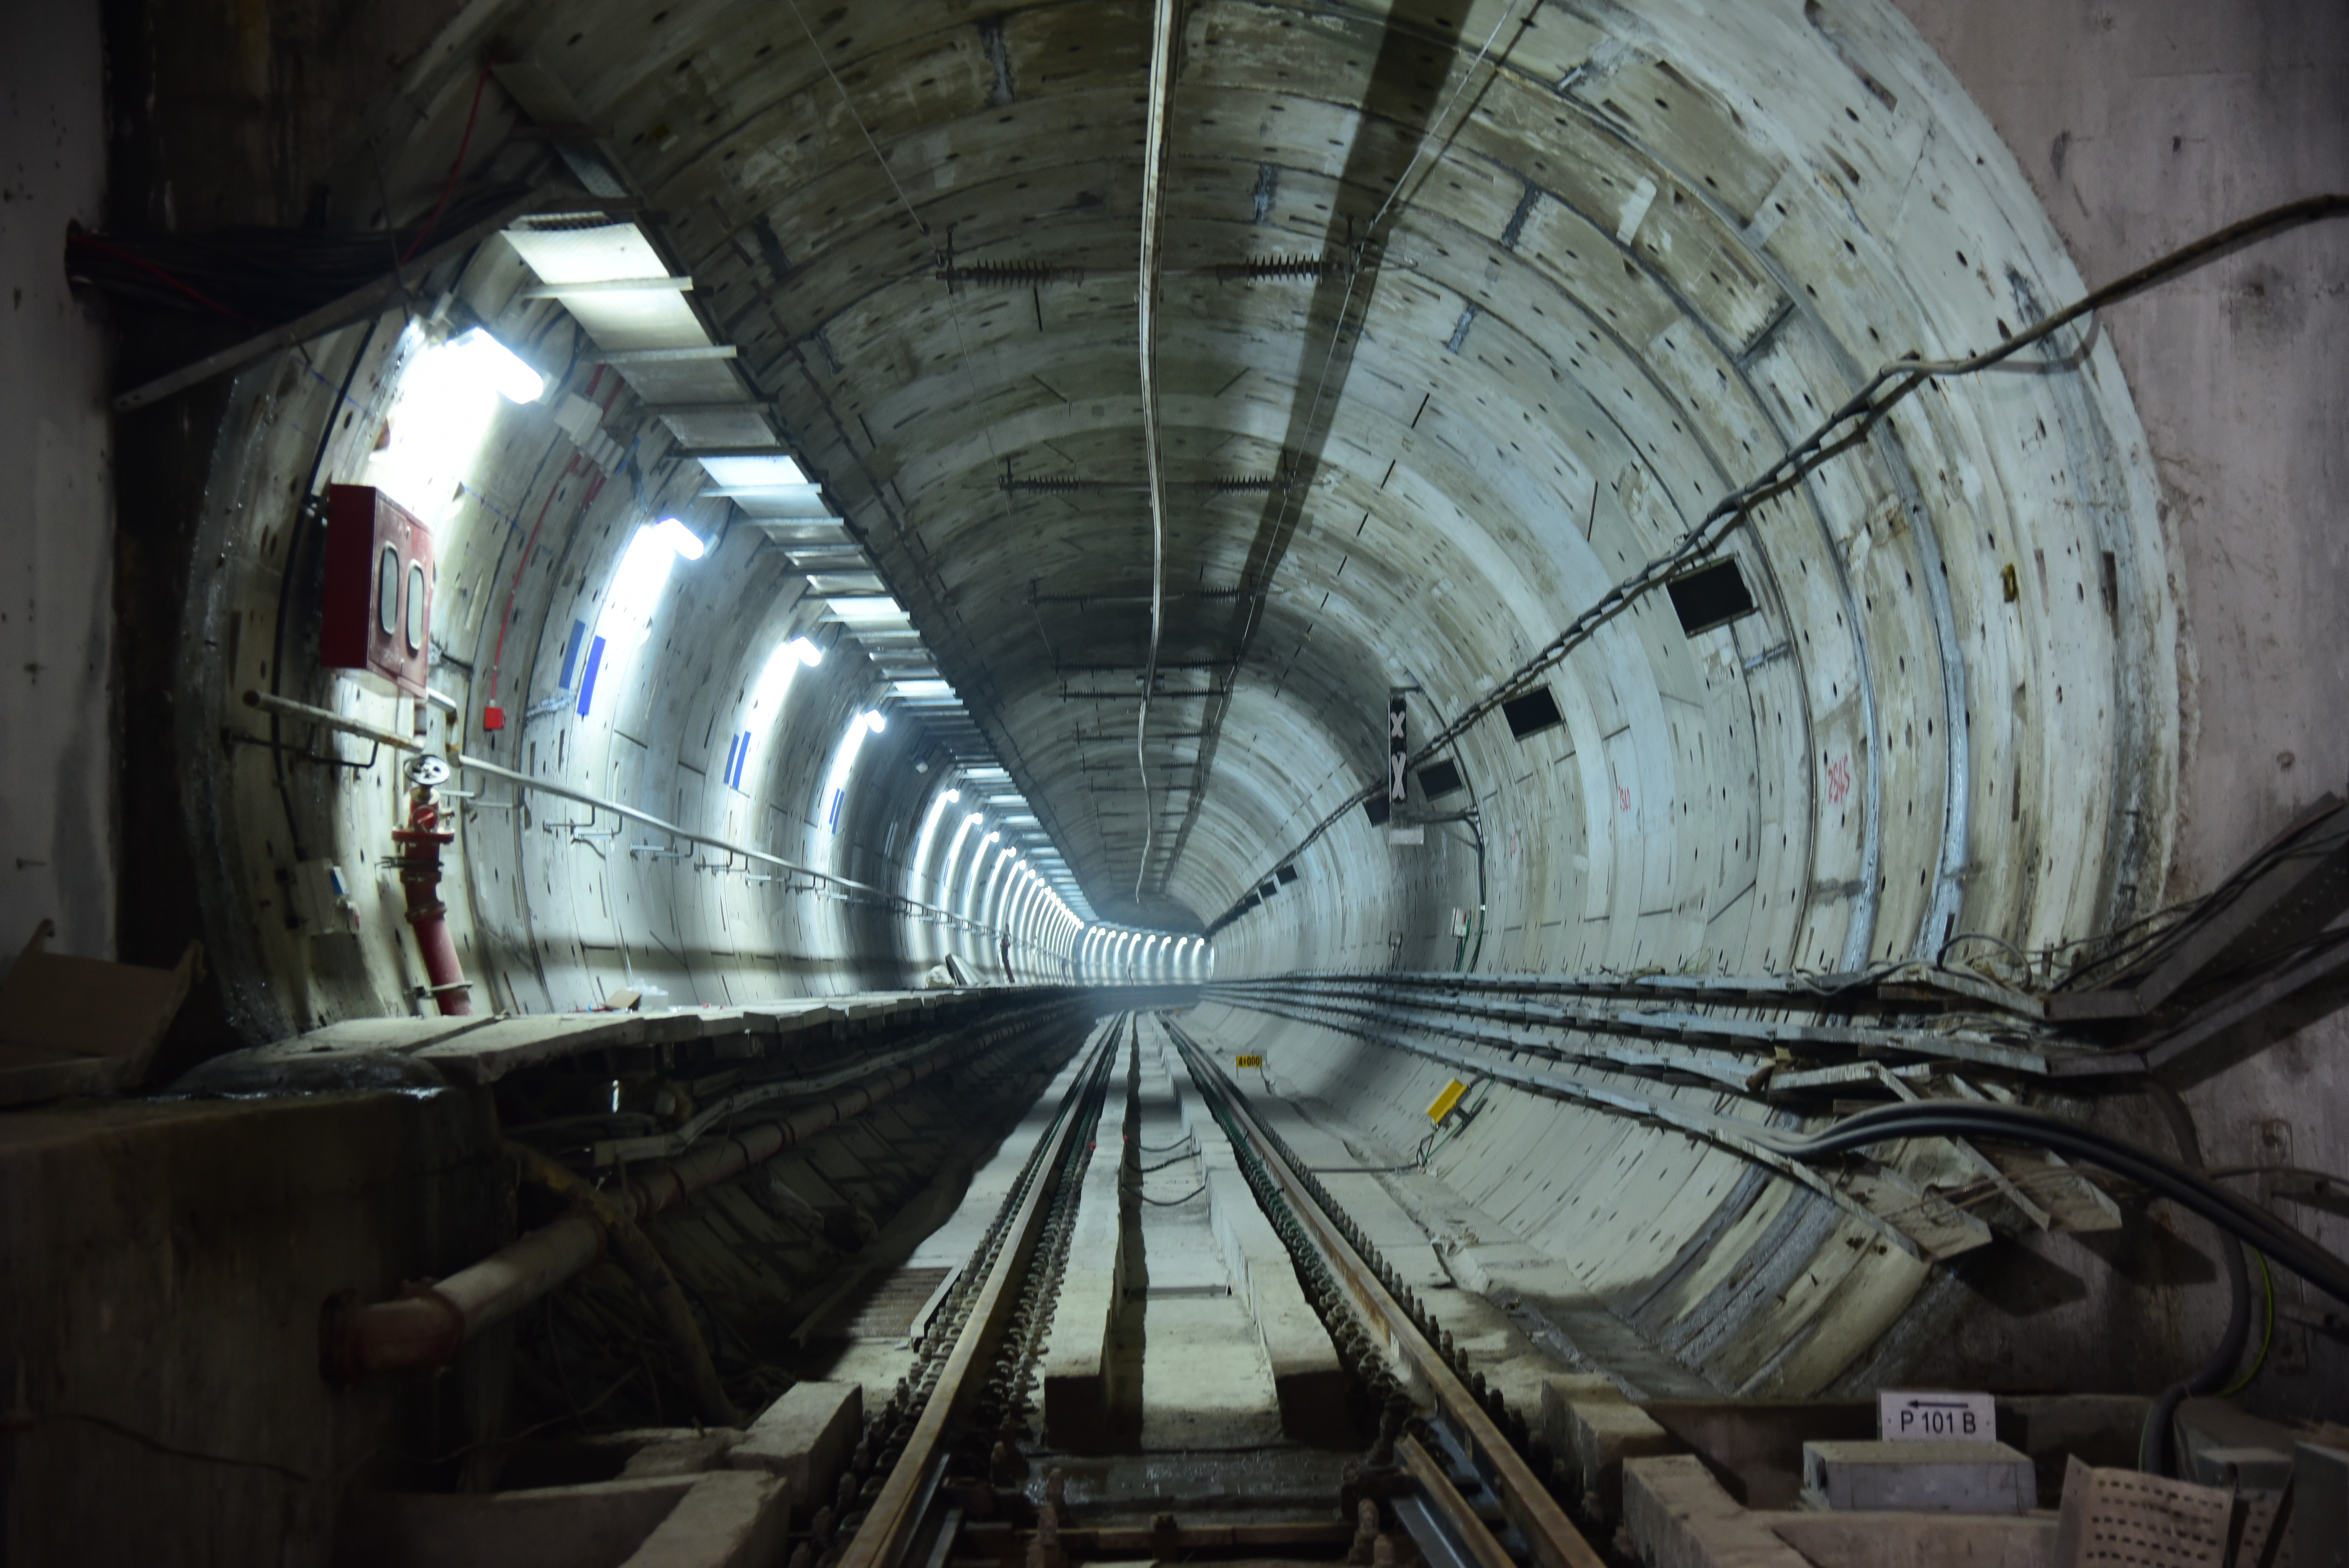 Nine out of 12 TBMs deployed by Chennai Metro Rail Limited (CMRL) were operated by Afcons